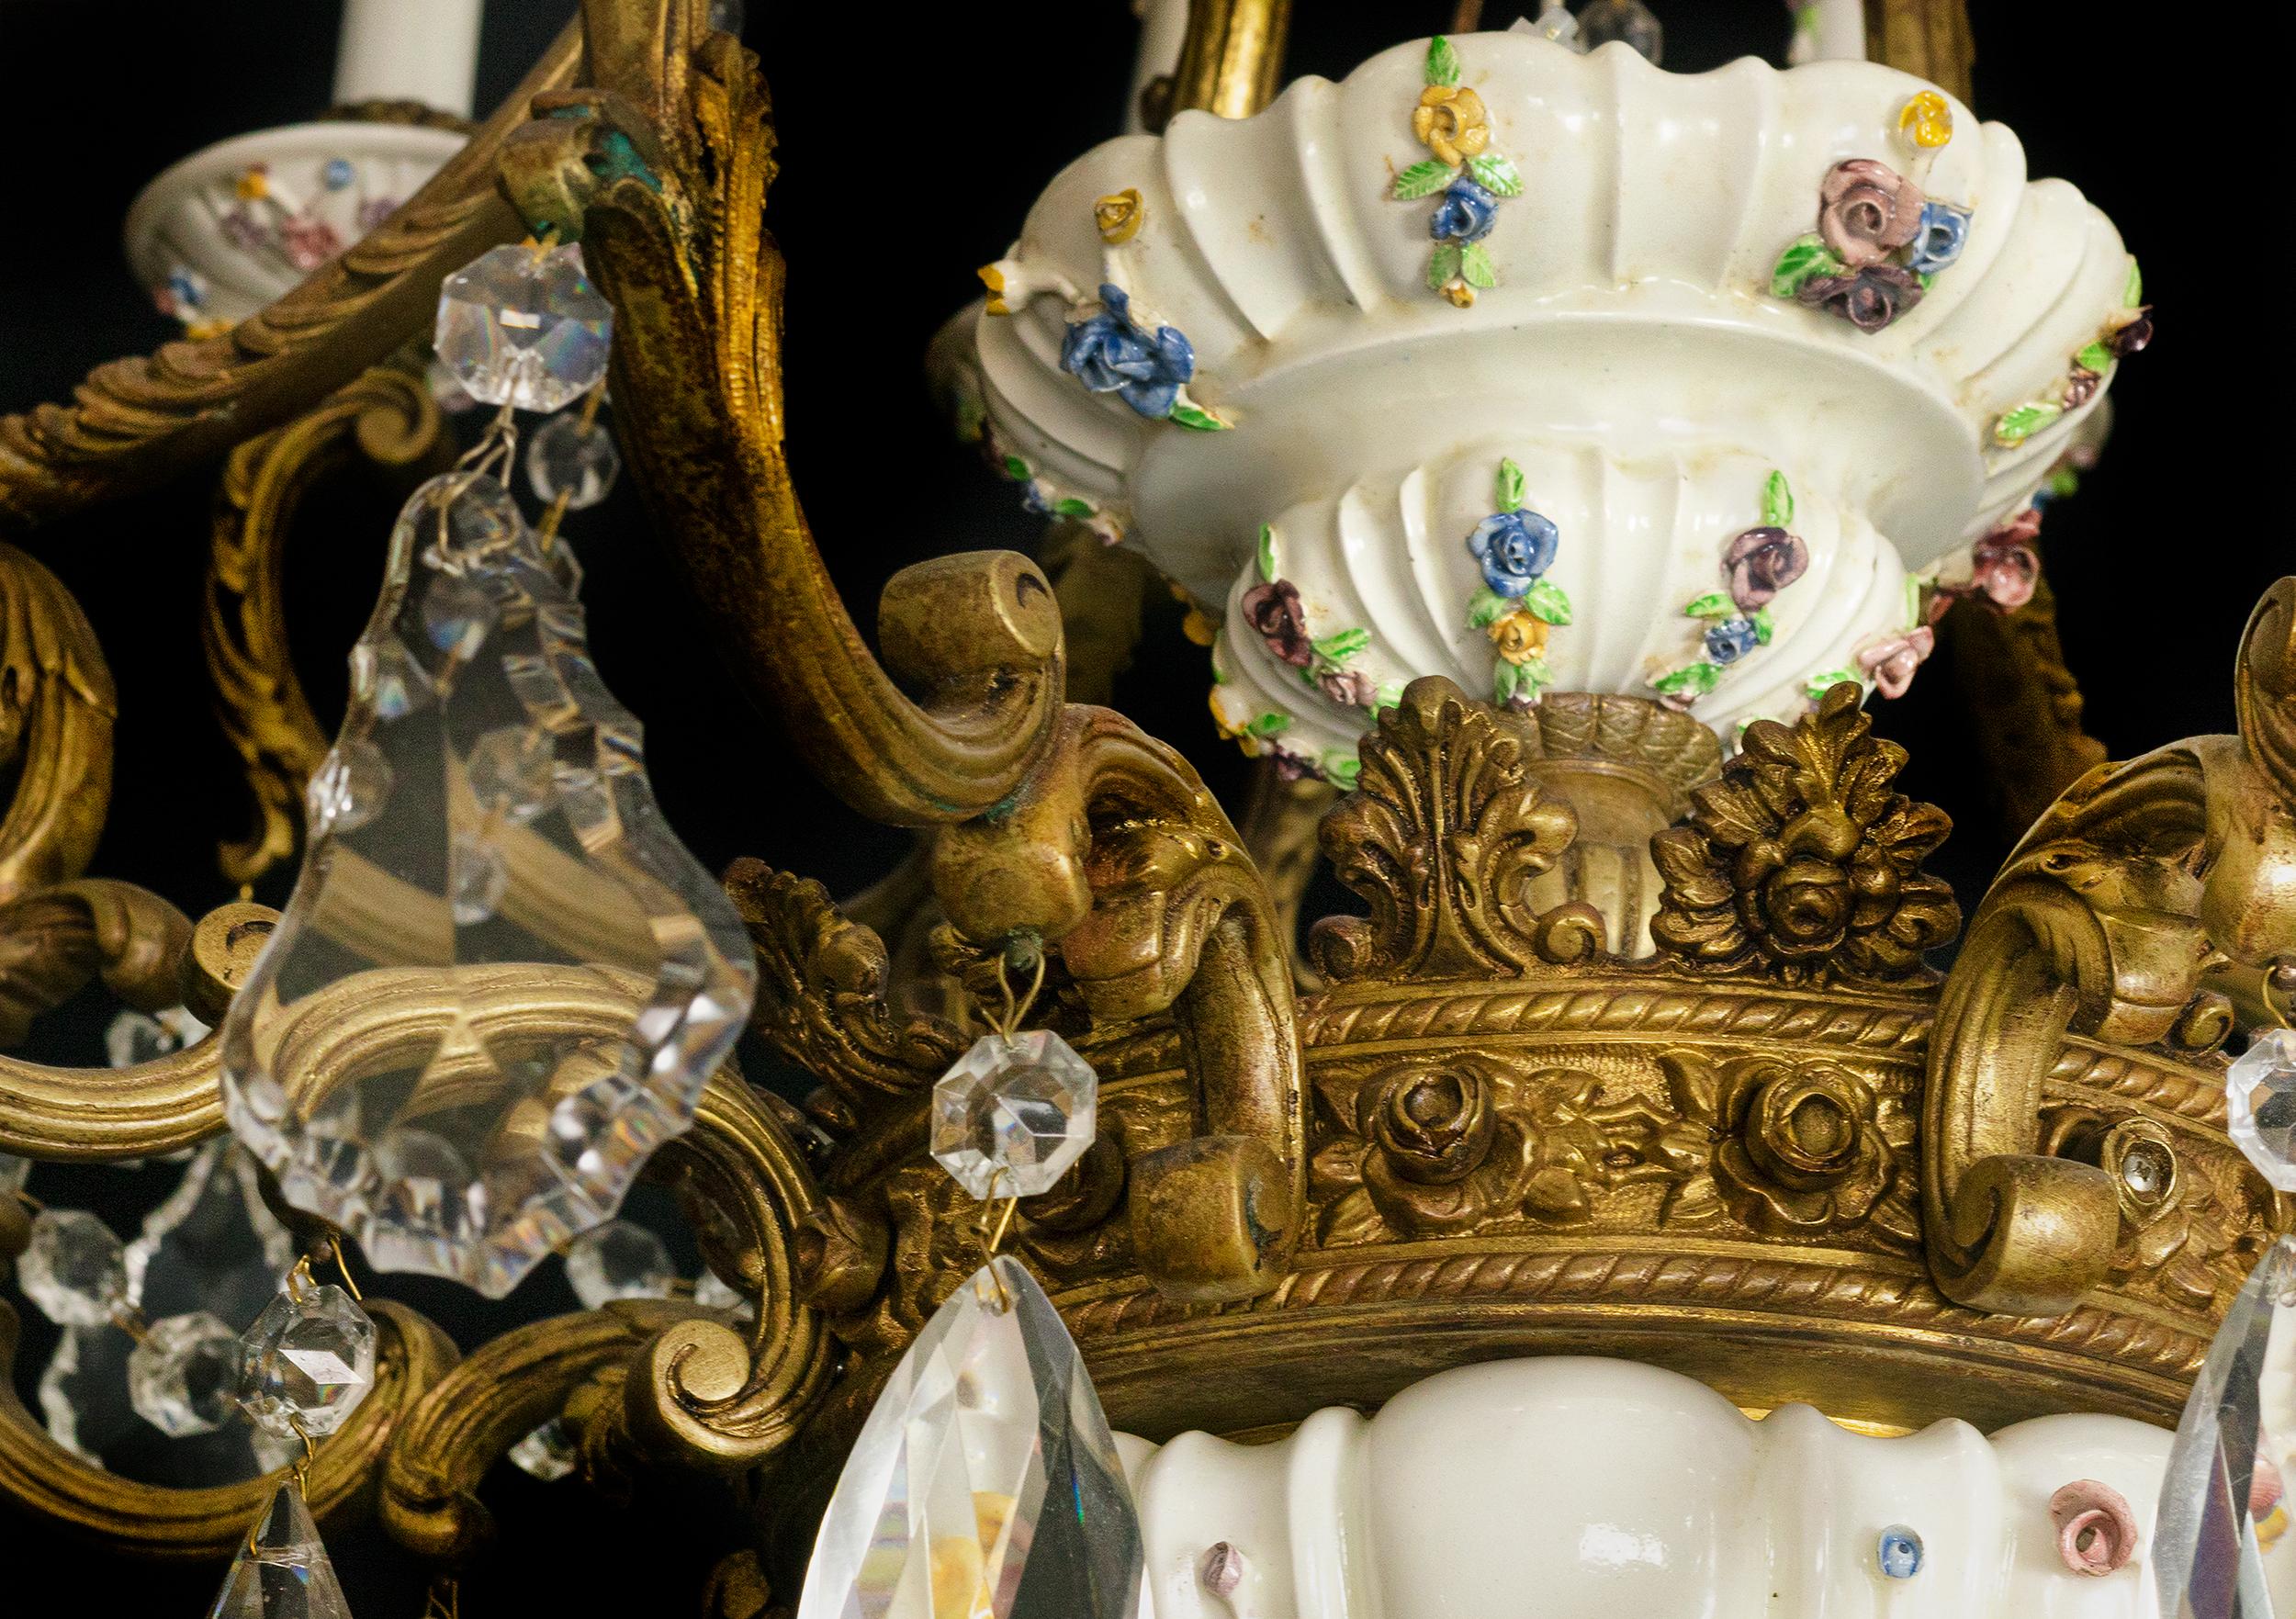 A Large 19th Century floral and vegetal decorated Chandelier with 16 golden bronze arms and hanging glass ornaments. 
Maissen porcelain and golden coloured arms.

Electric installation reviewed recently and working. 

Height 51,1 in (130